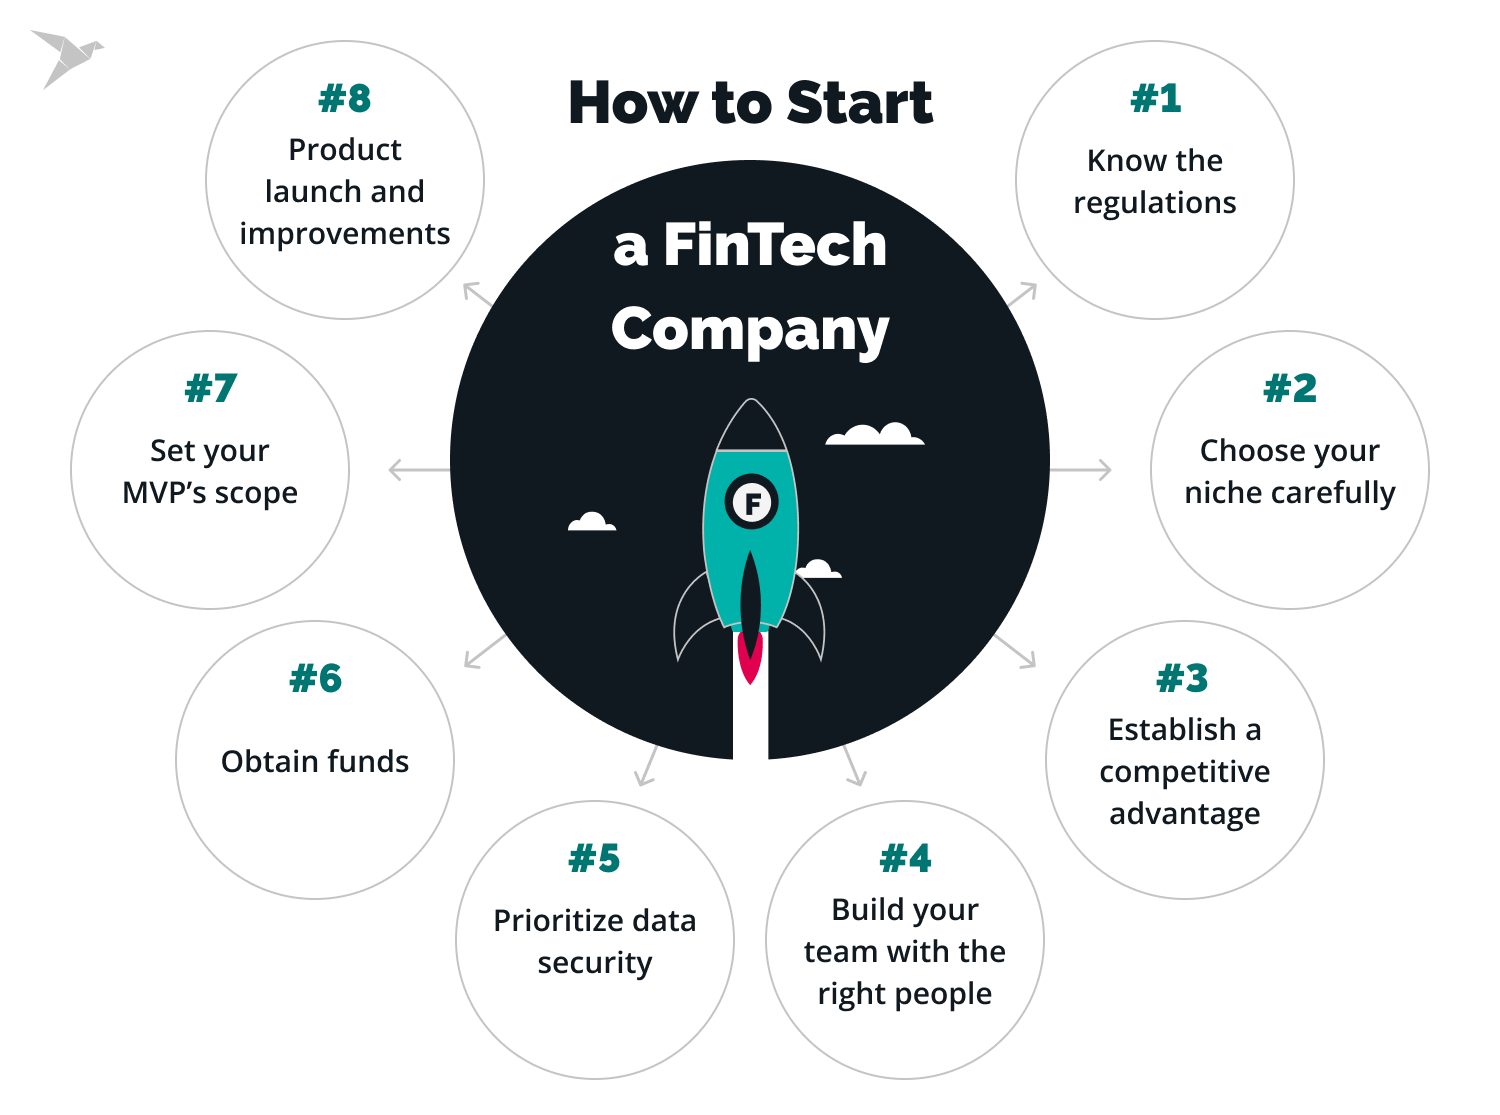 How to Start a FinTech Company